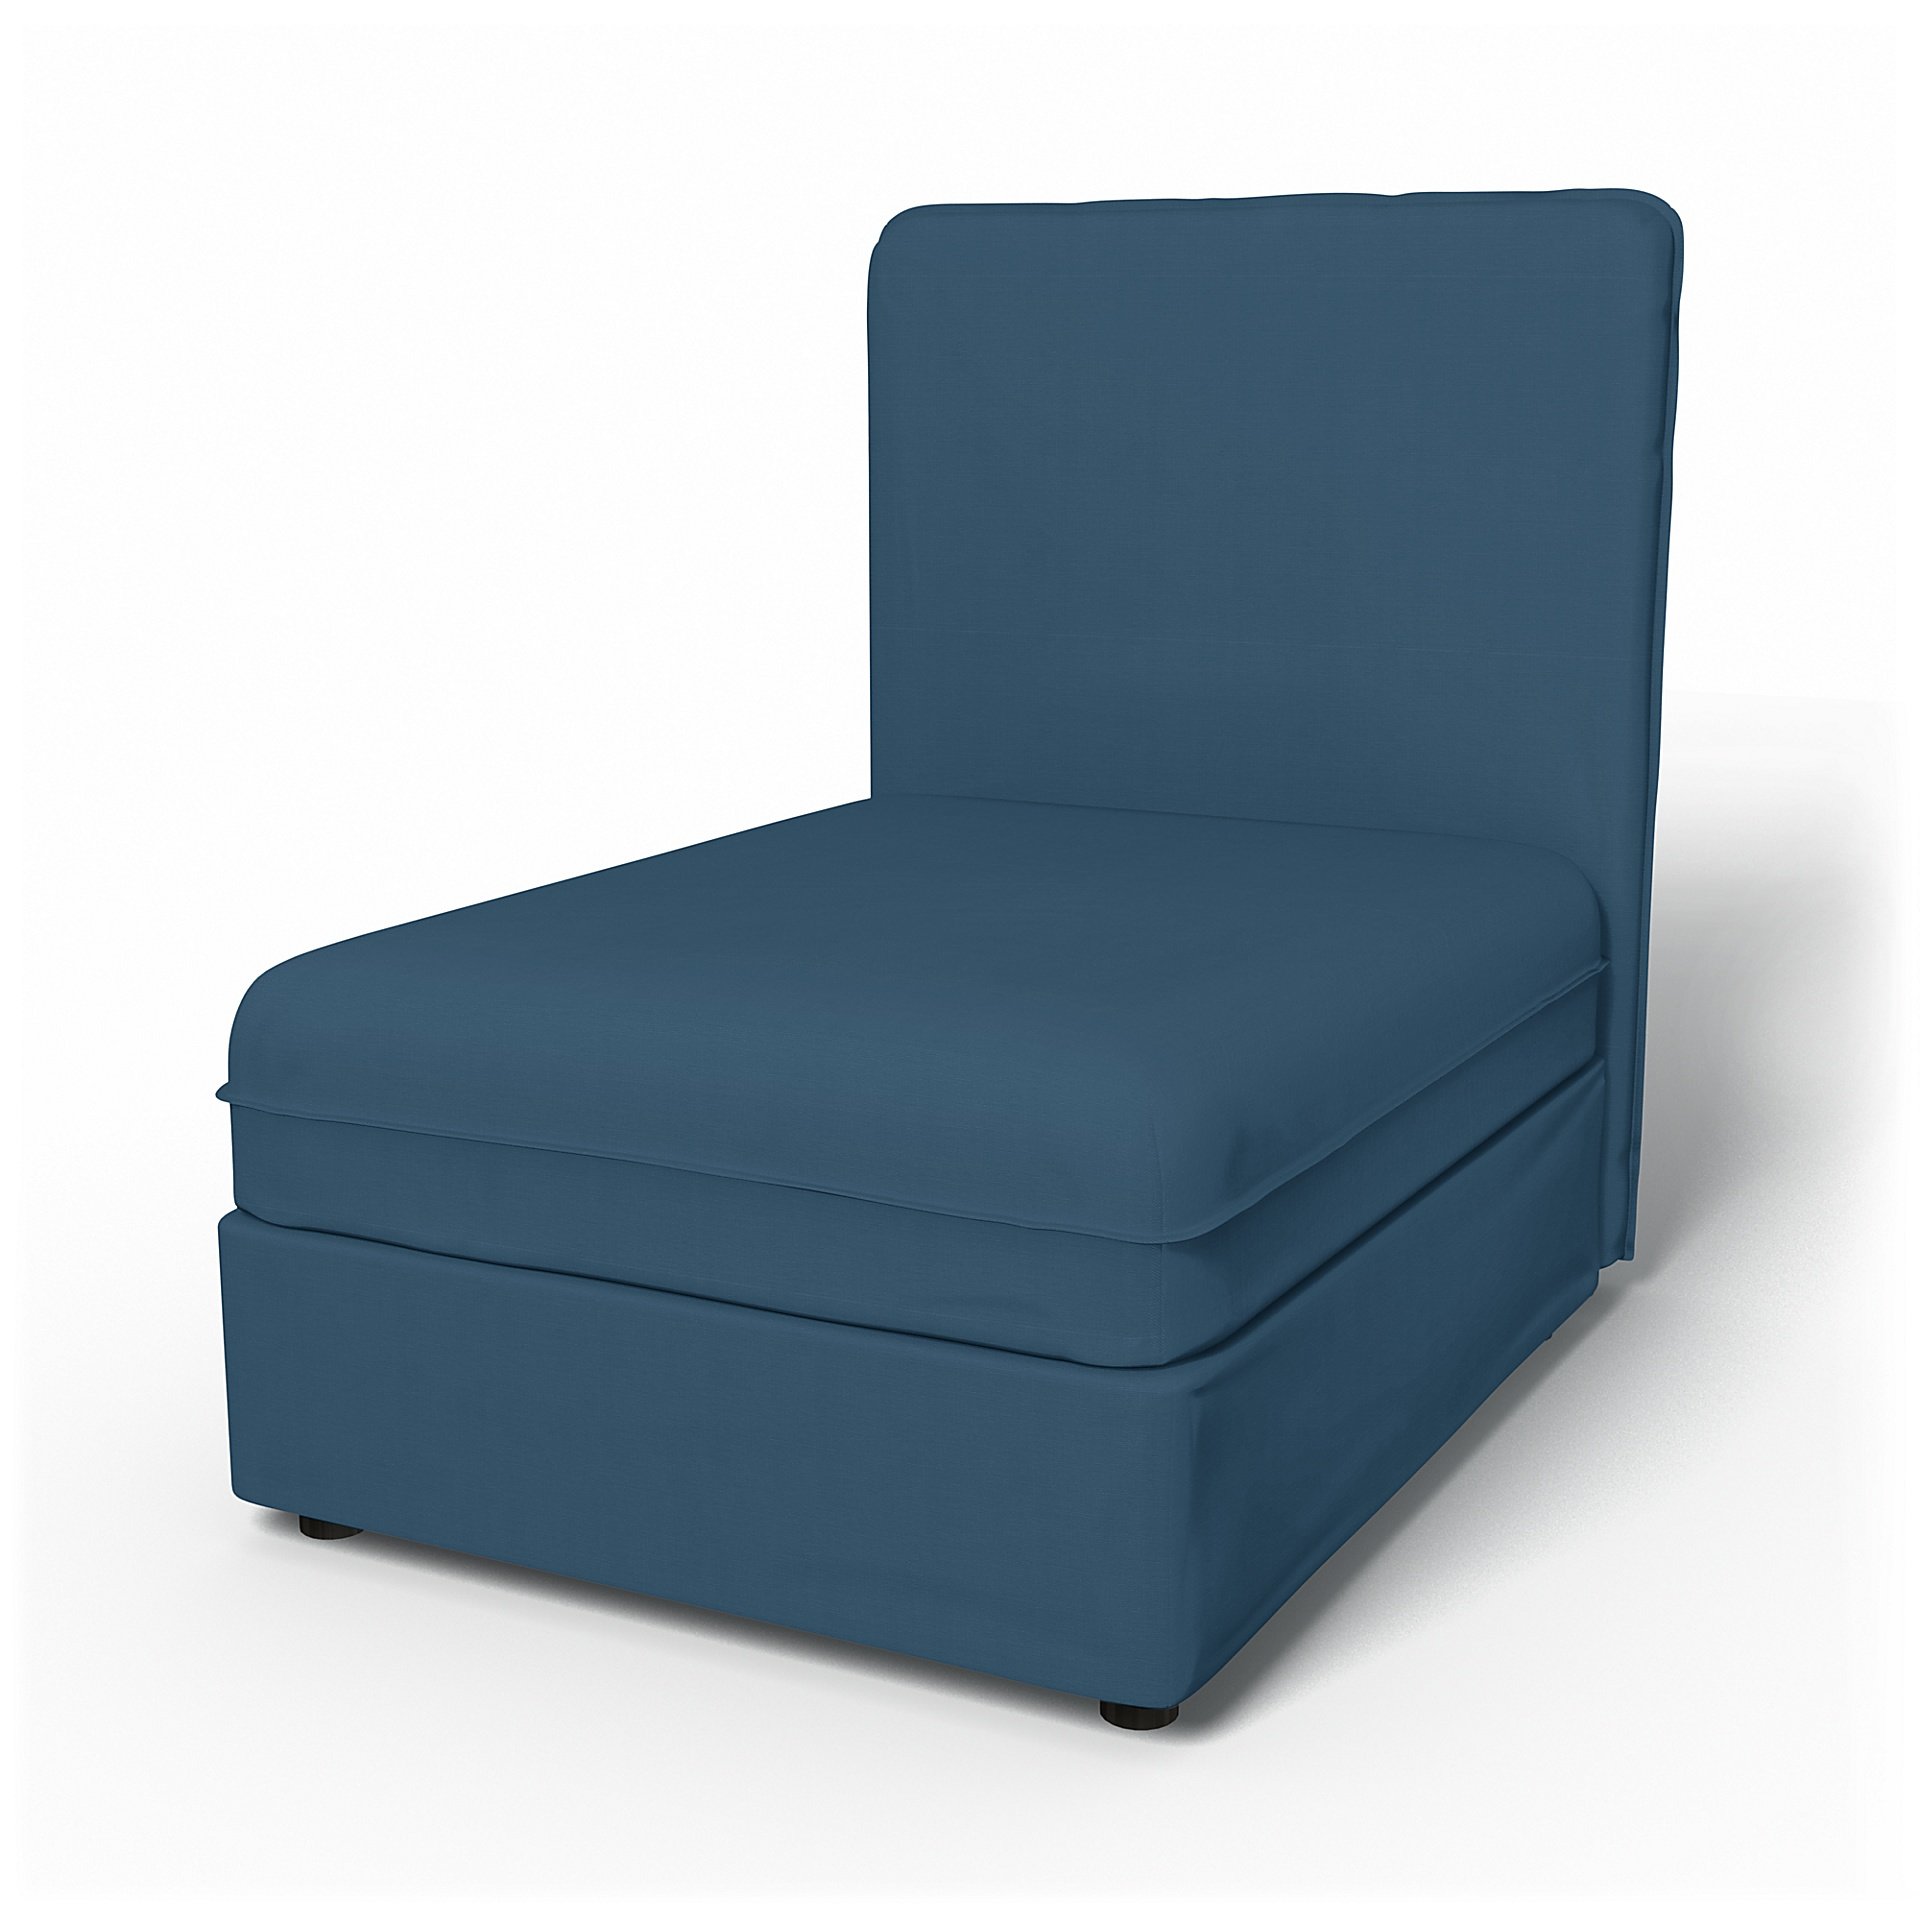 IKEA - Vallentuna Seat Module with High Back Cover 80x100cm 32x32in, Real Teal, Cotton - Bemz